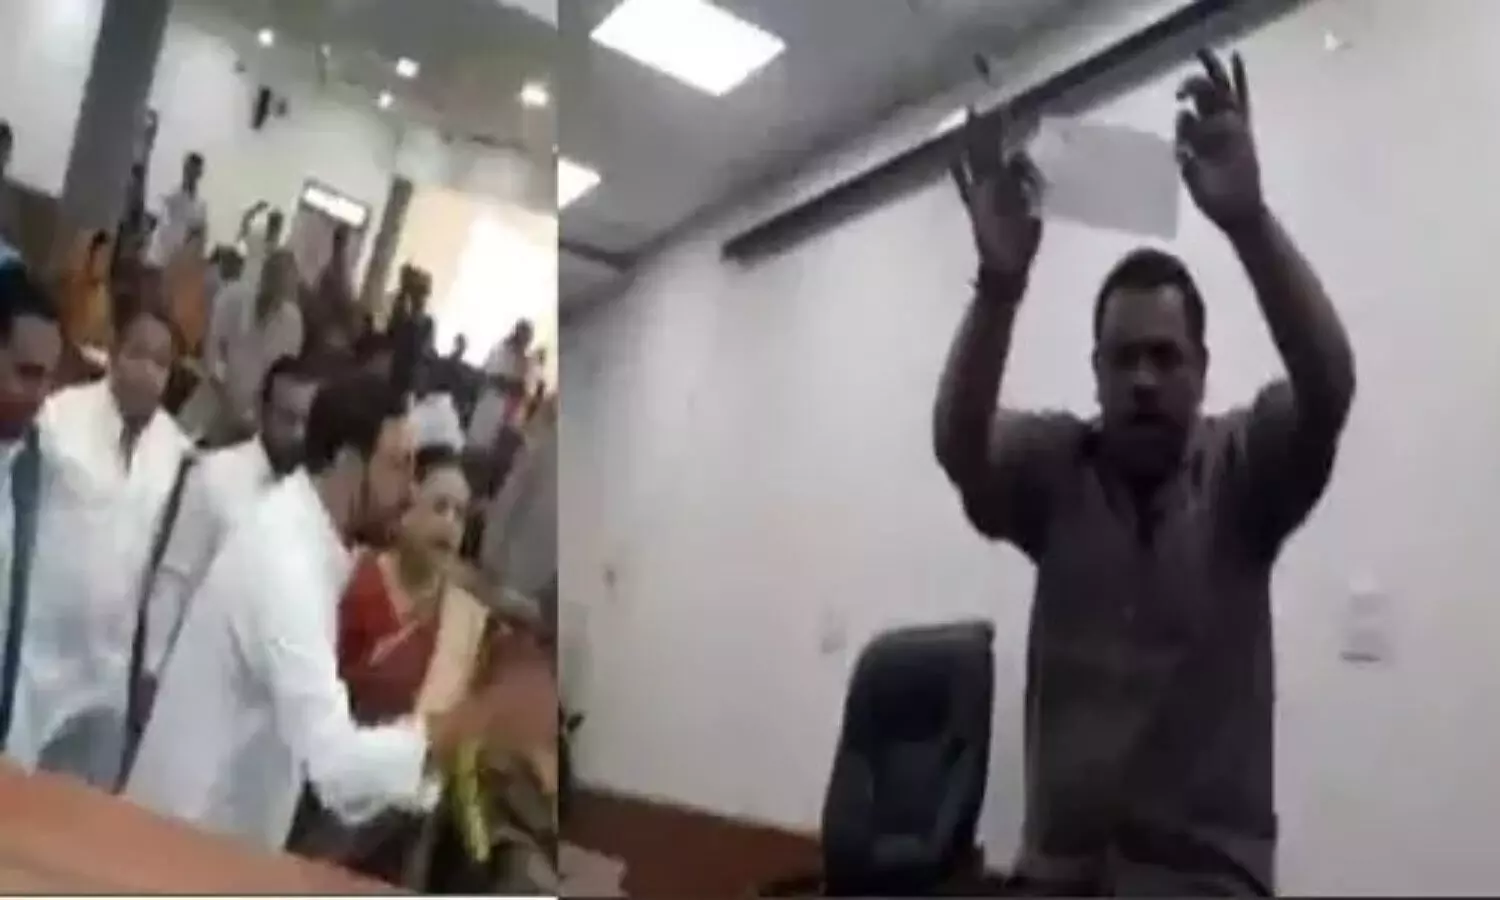 MP news in Municipal Corporation Council meeting ruckus Action had stopped